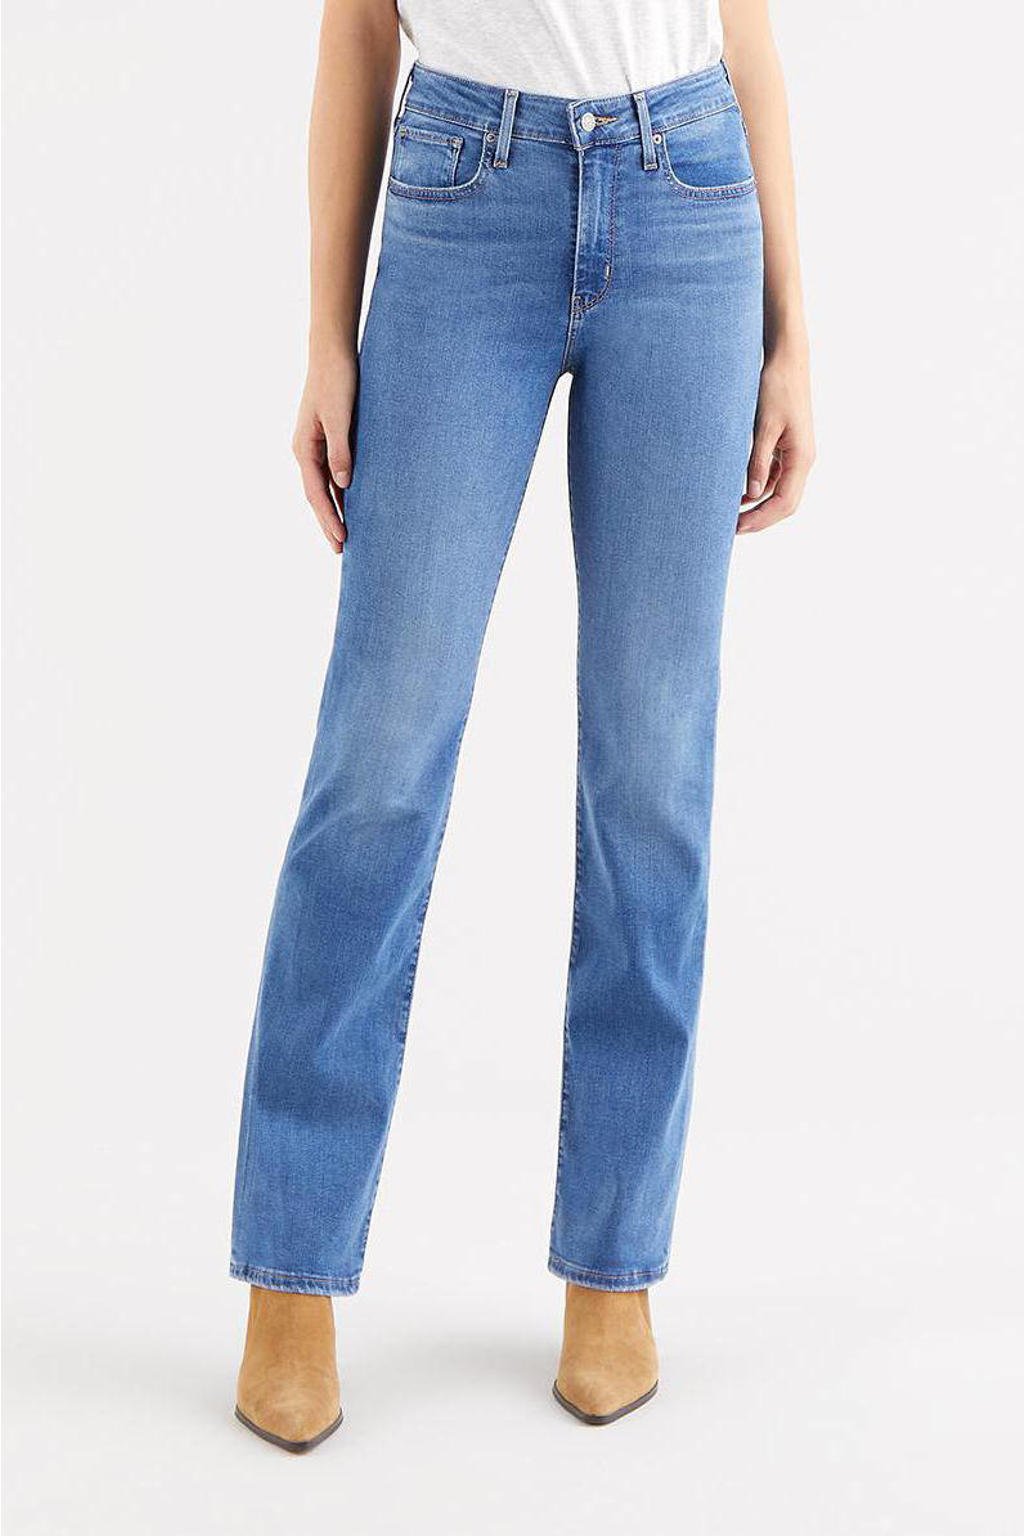 Levi's 725 high rise bootcut high waist flared jeans stonewashed